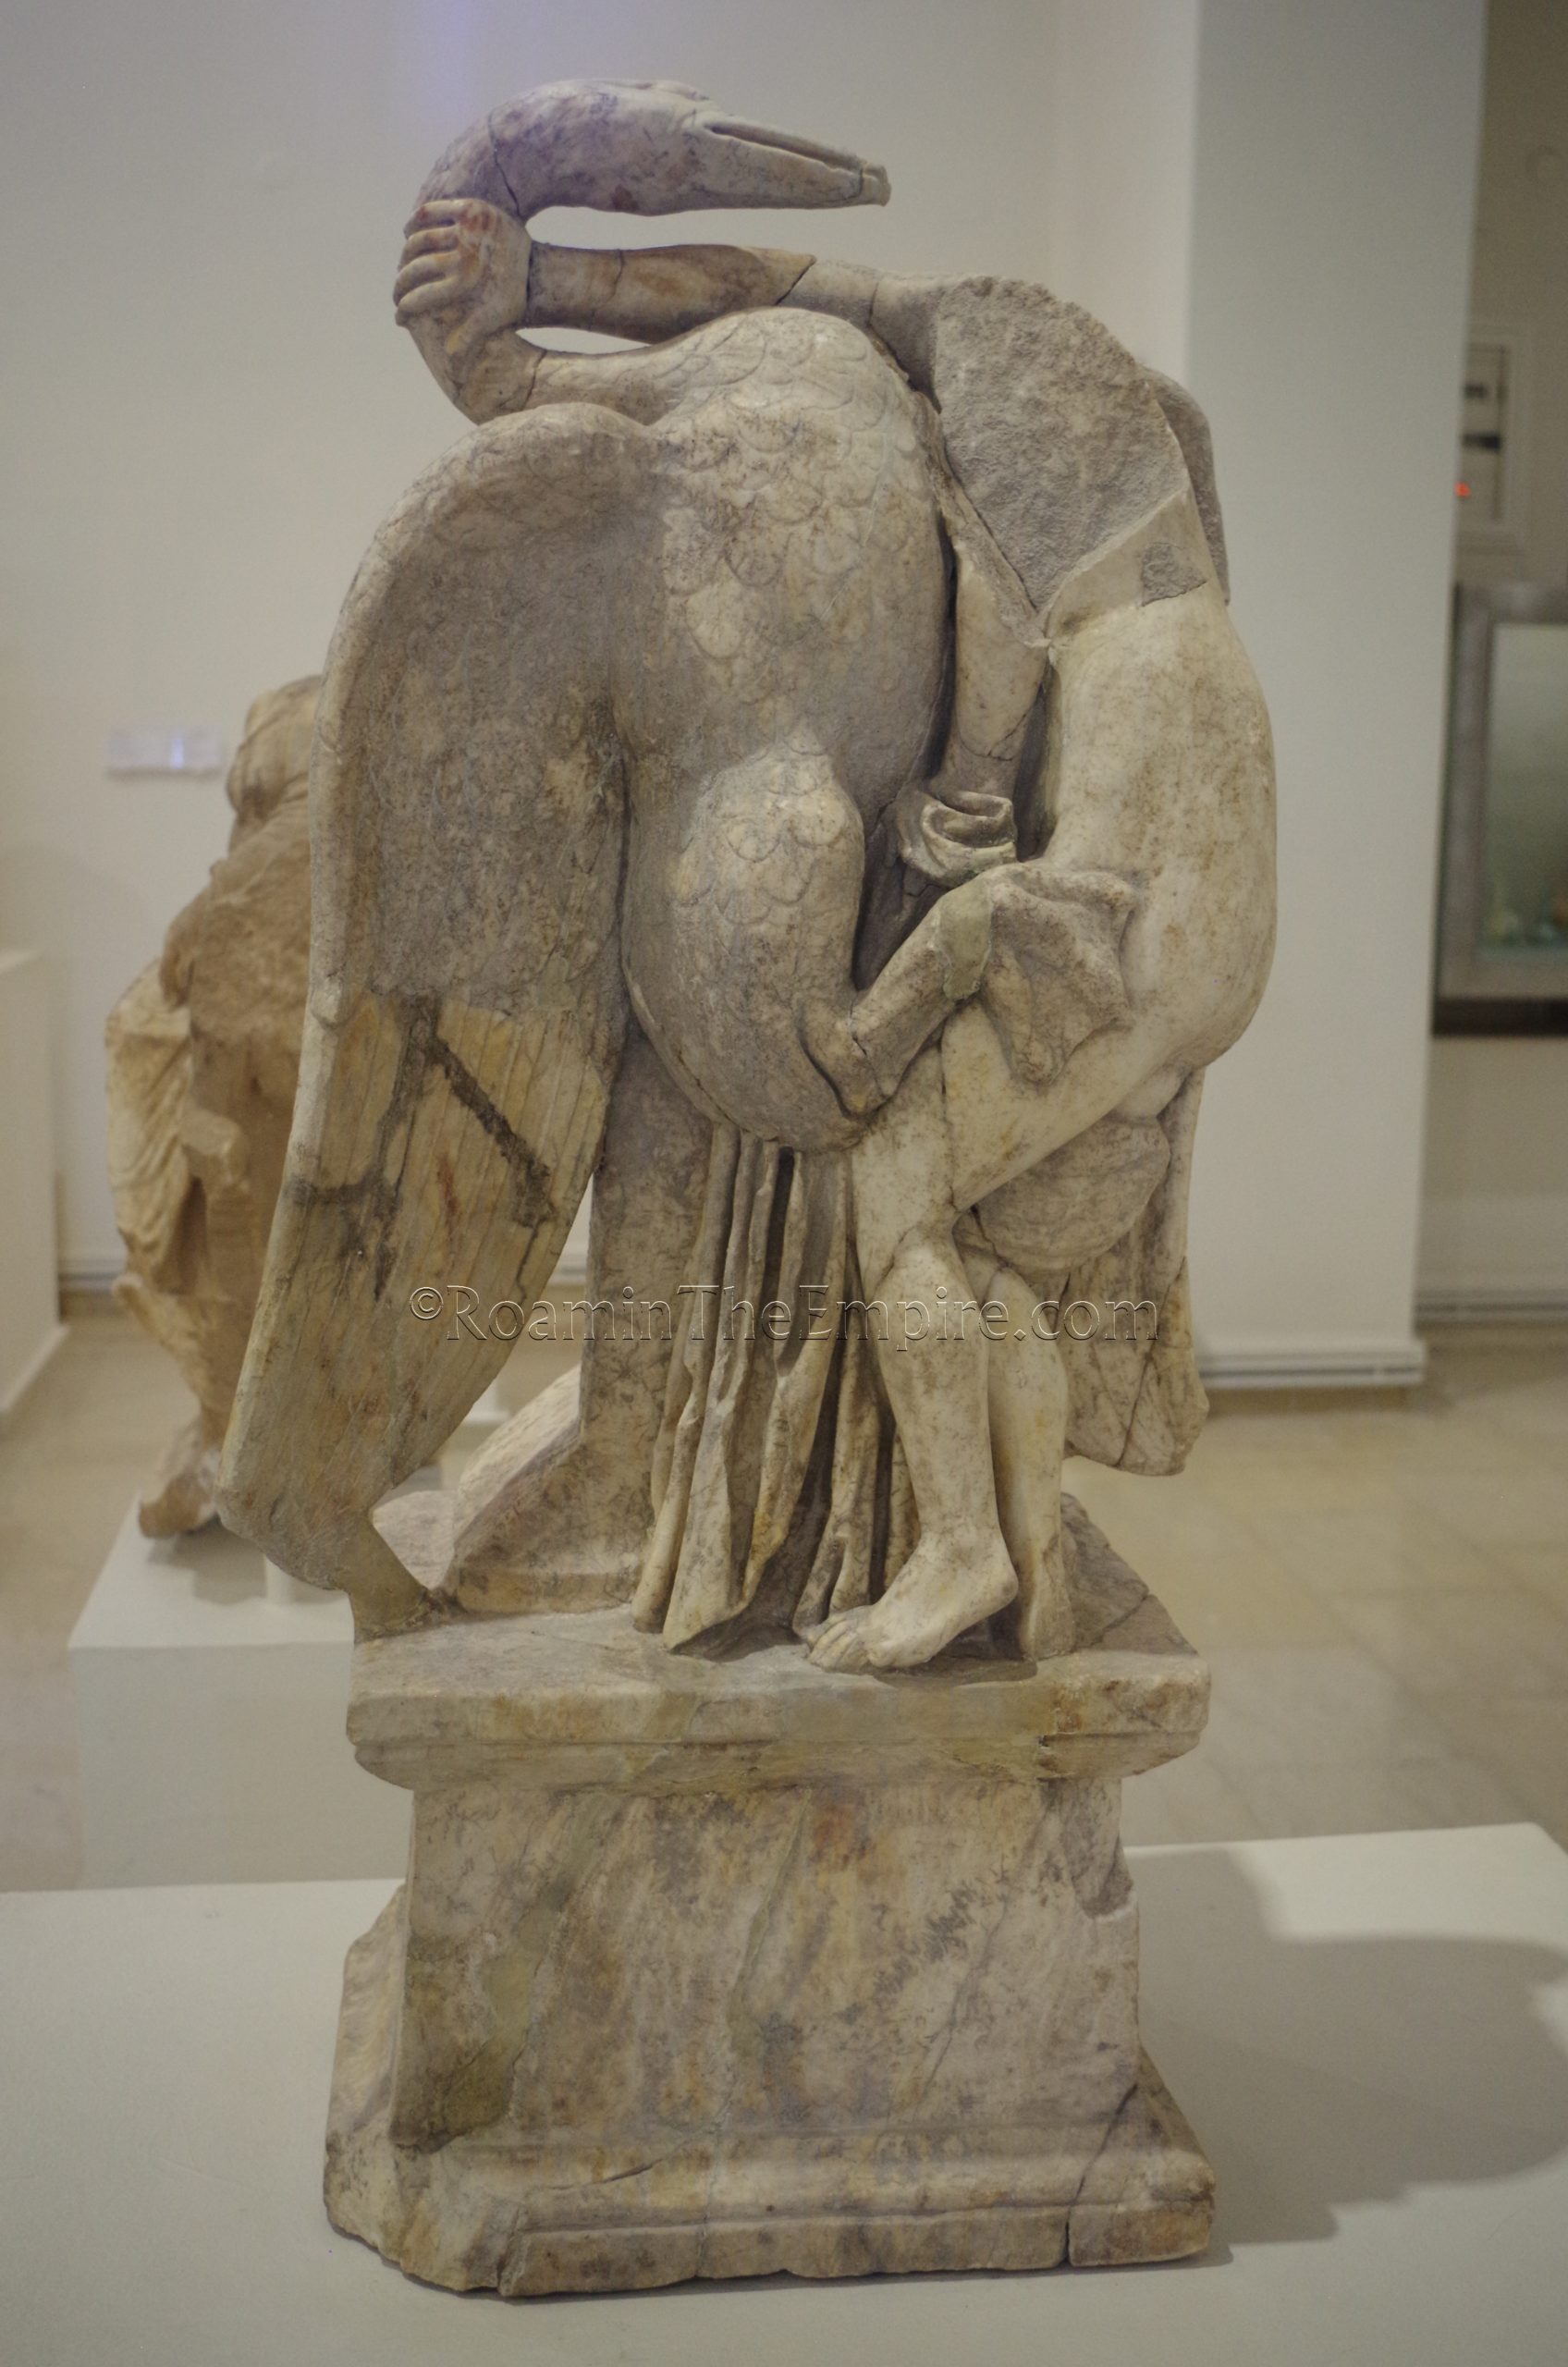 Trapezophoros depicting Leda and the swan, from the House of Leda. Dated to the 2nd century CE. Archaeological Museum of Dion. Dium.